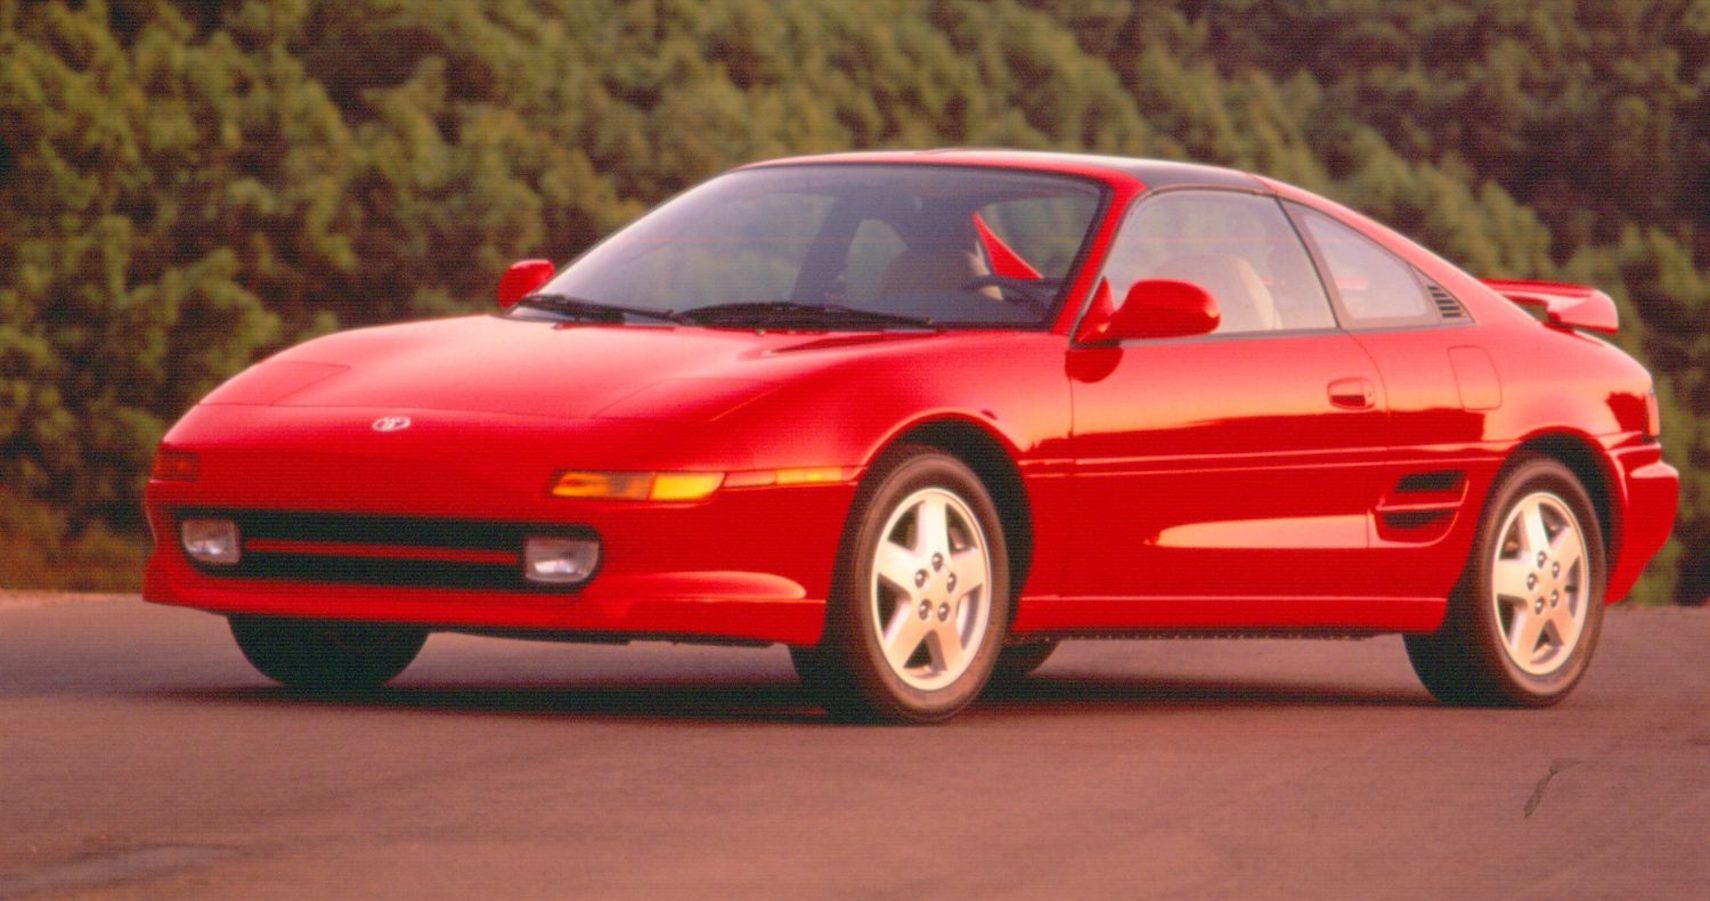 Red Toyota MR2 front quarter angle